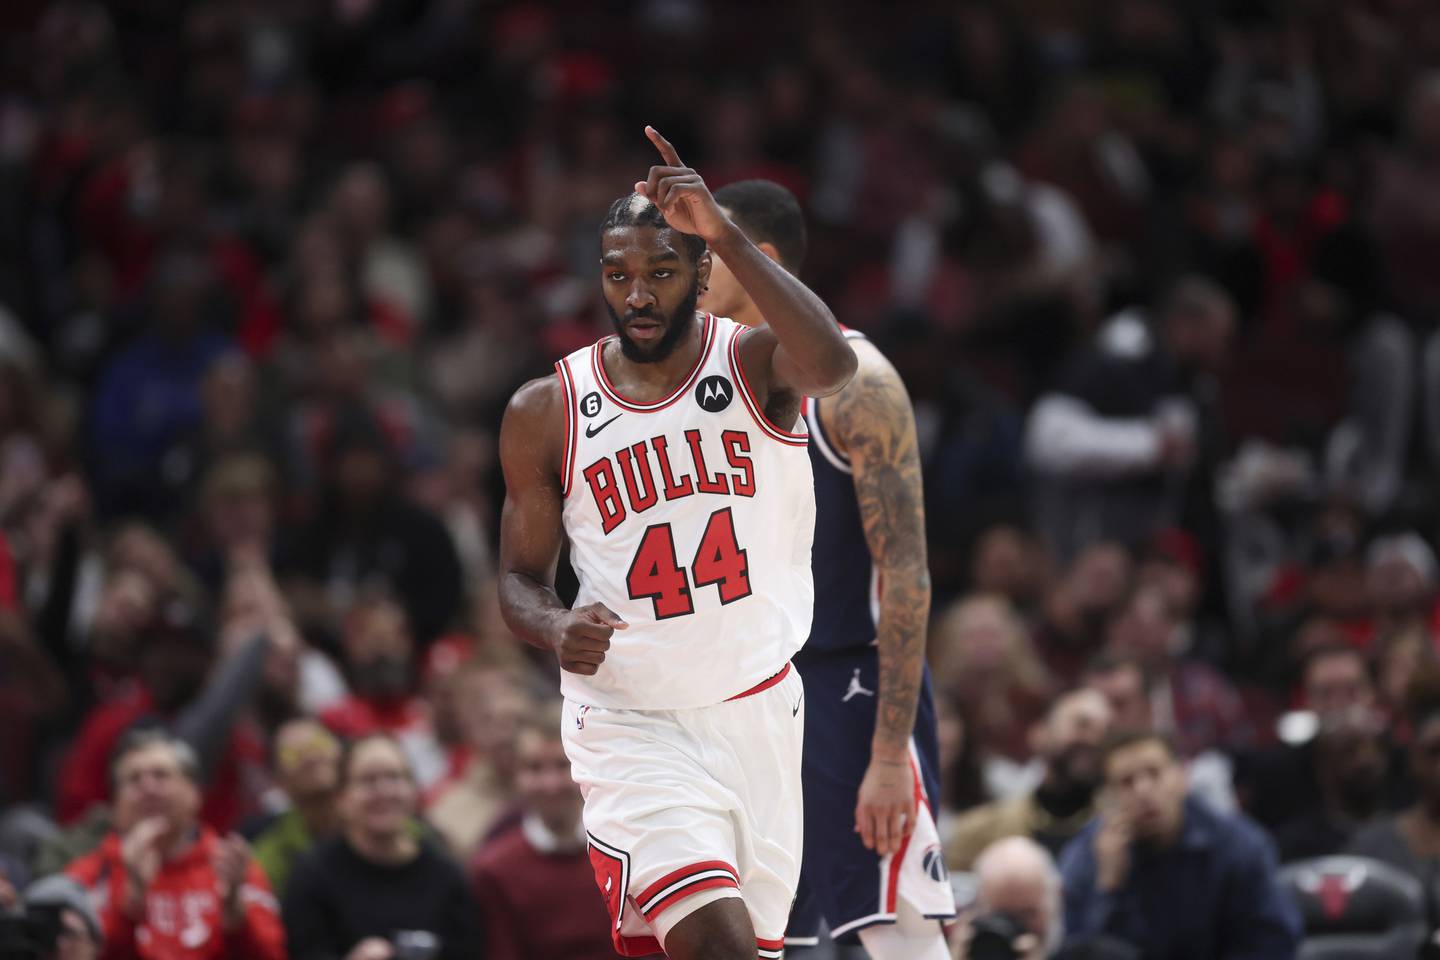 Bulls forward Patrick Williams points up after making a basket during the second period against the Wizards at the United Center on Dec. 7, 2022.